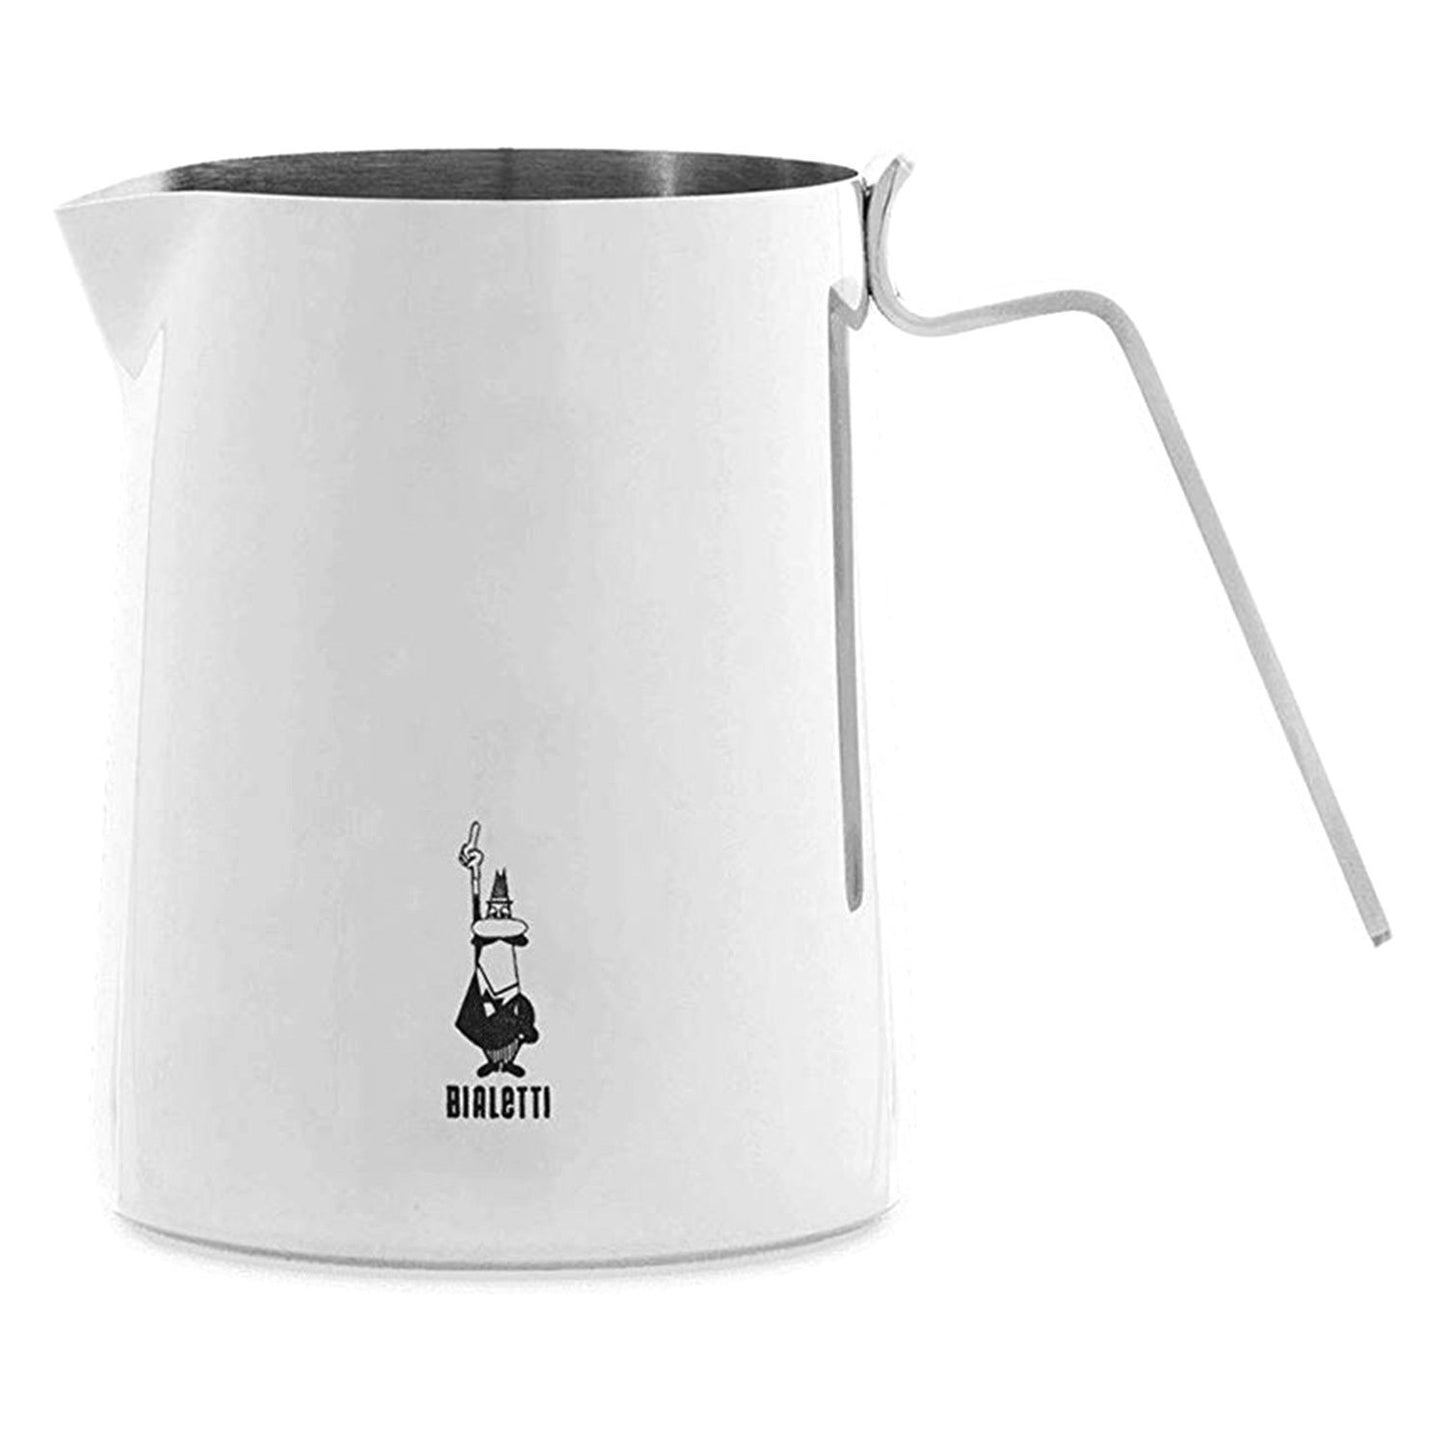 Milk frother pitcher